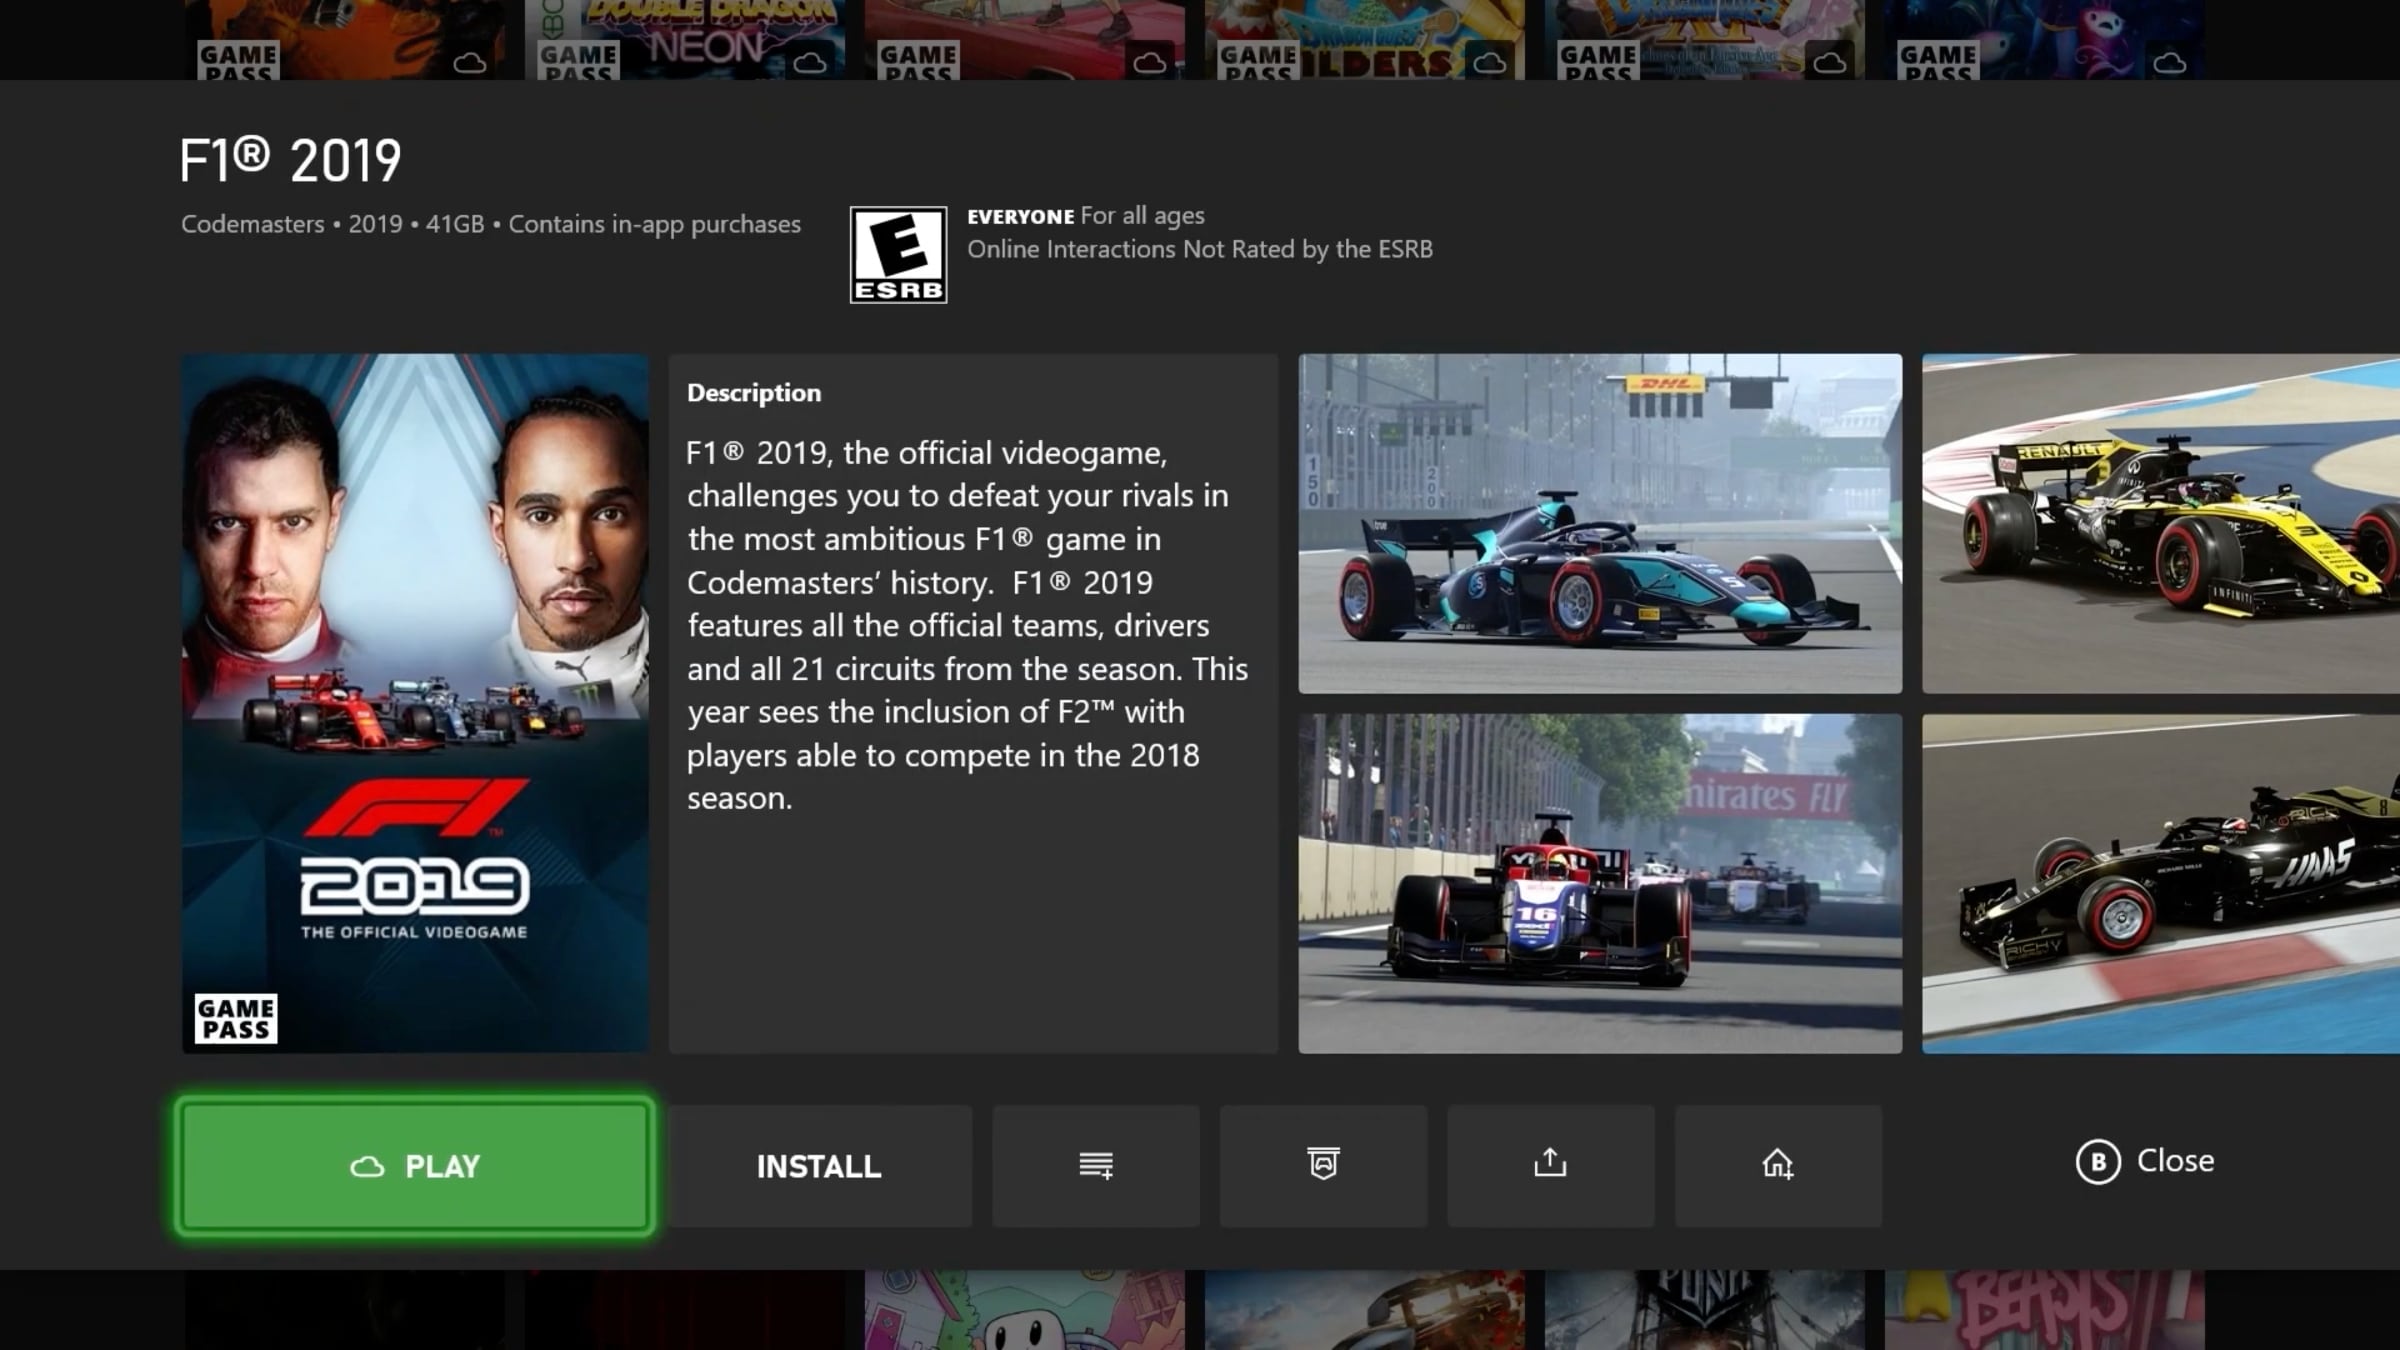 Xbox Cloud Gaming's next-gen upgrade begins rolling out